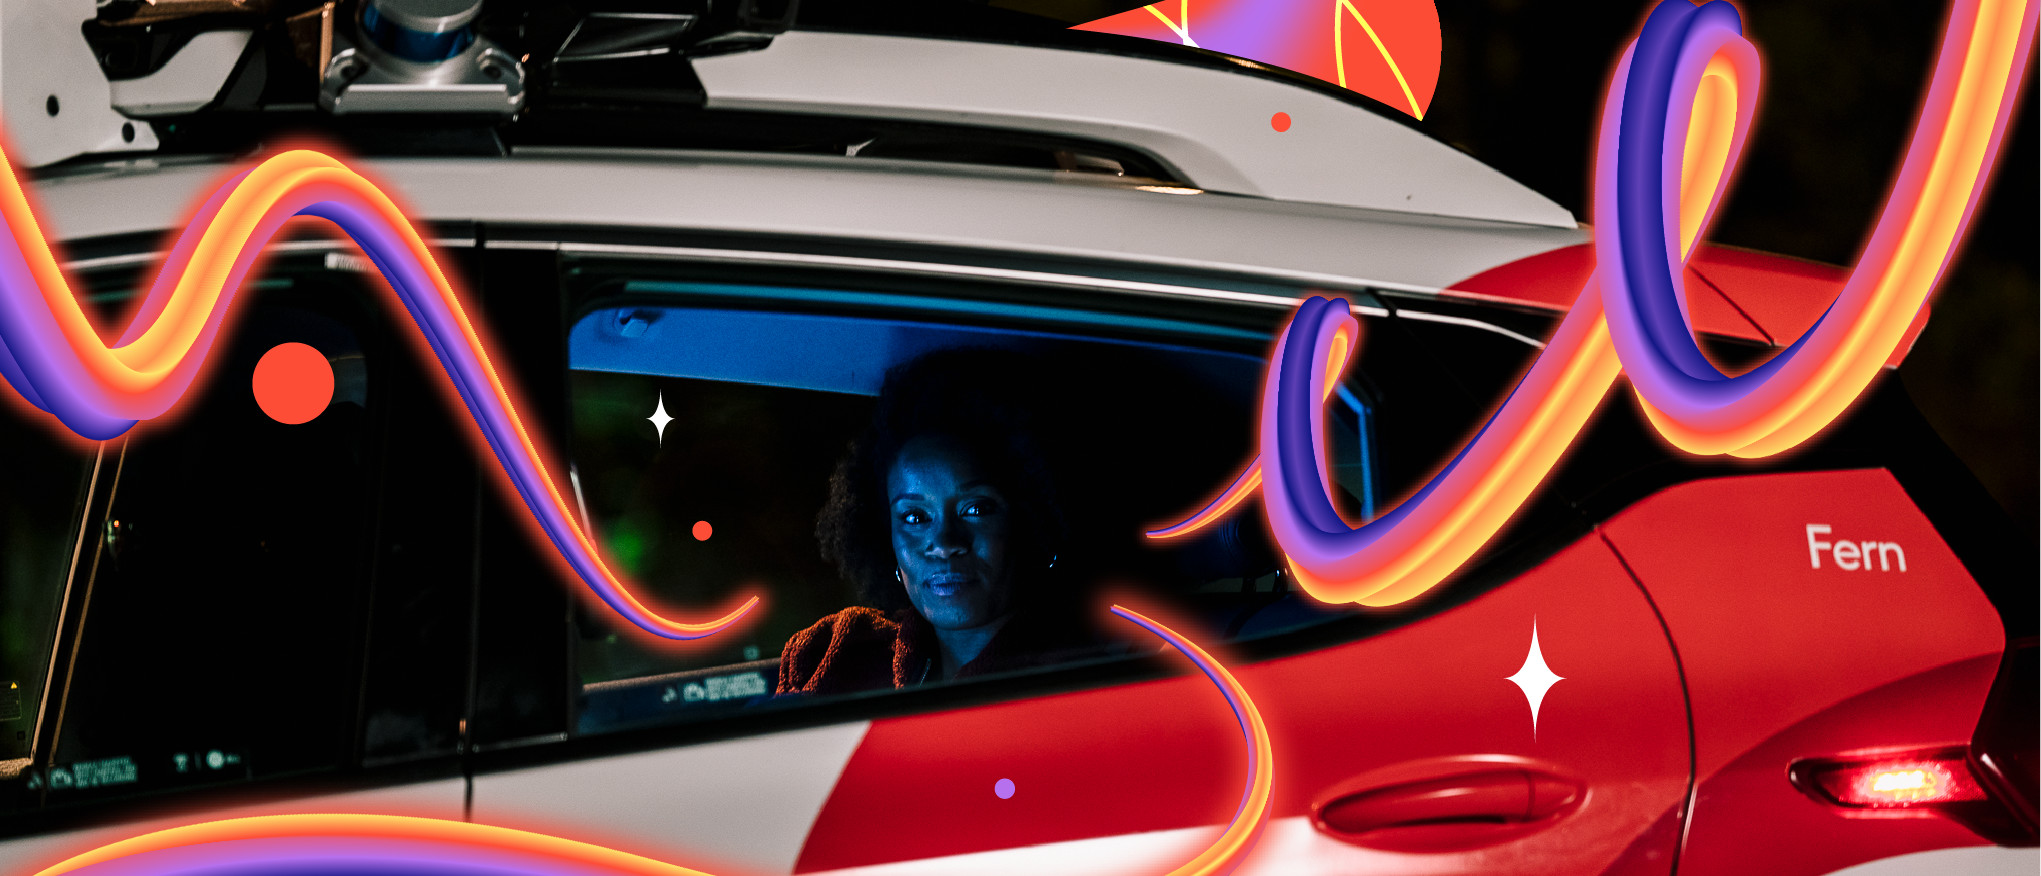 Woman in back of Cruise car with neon effects